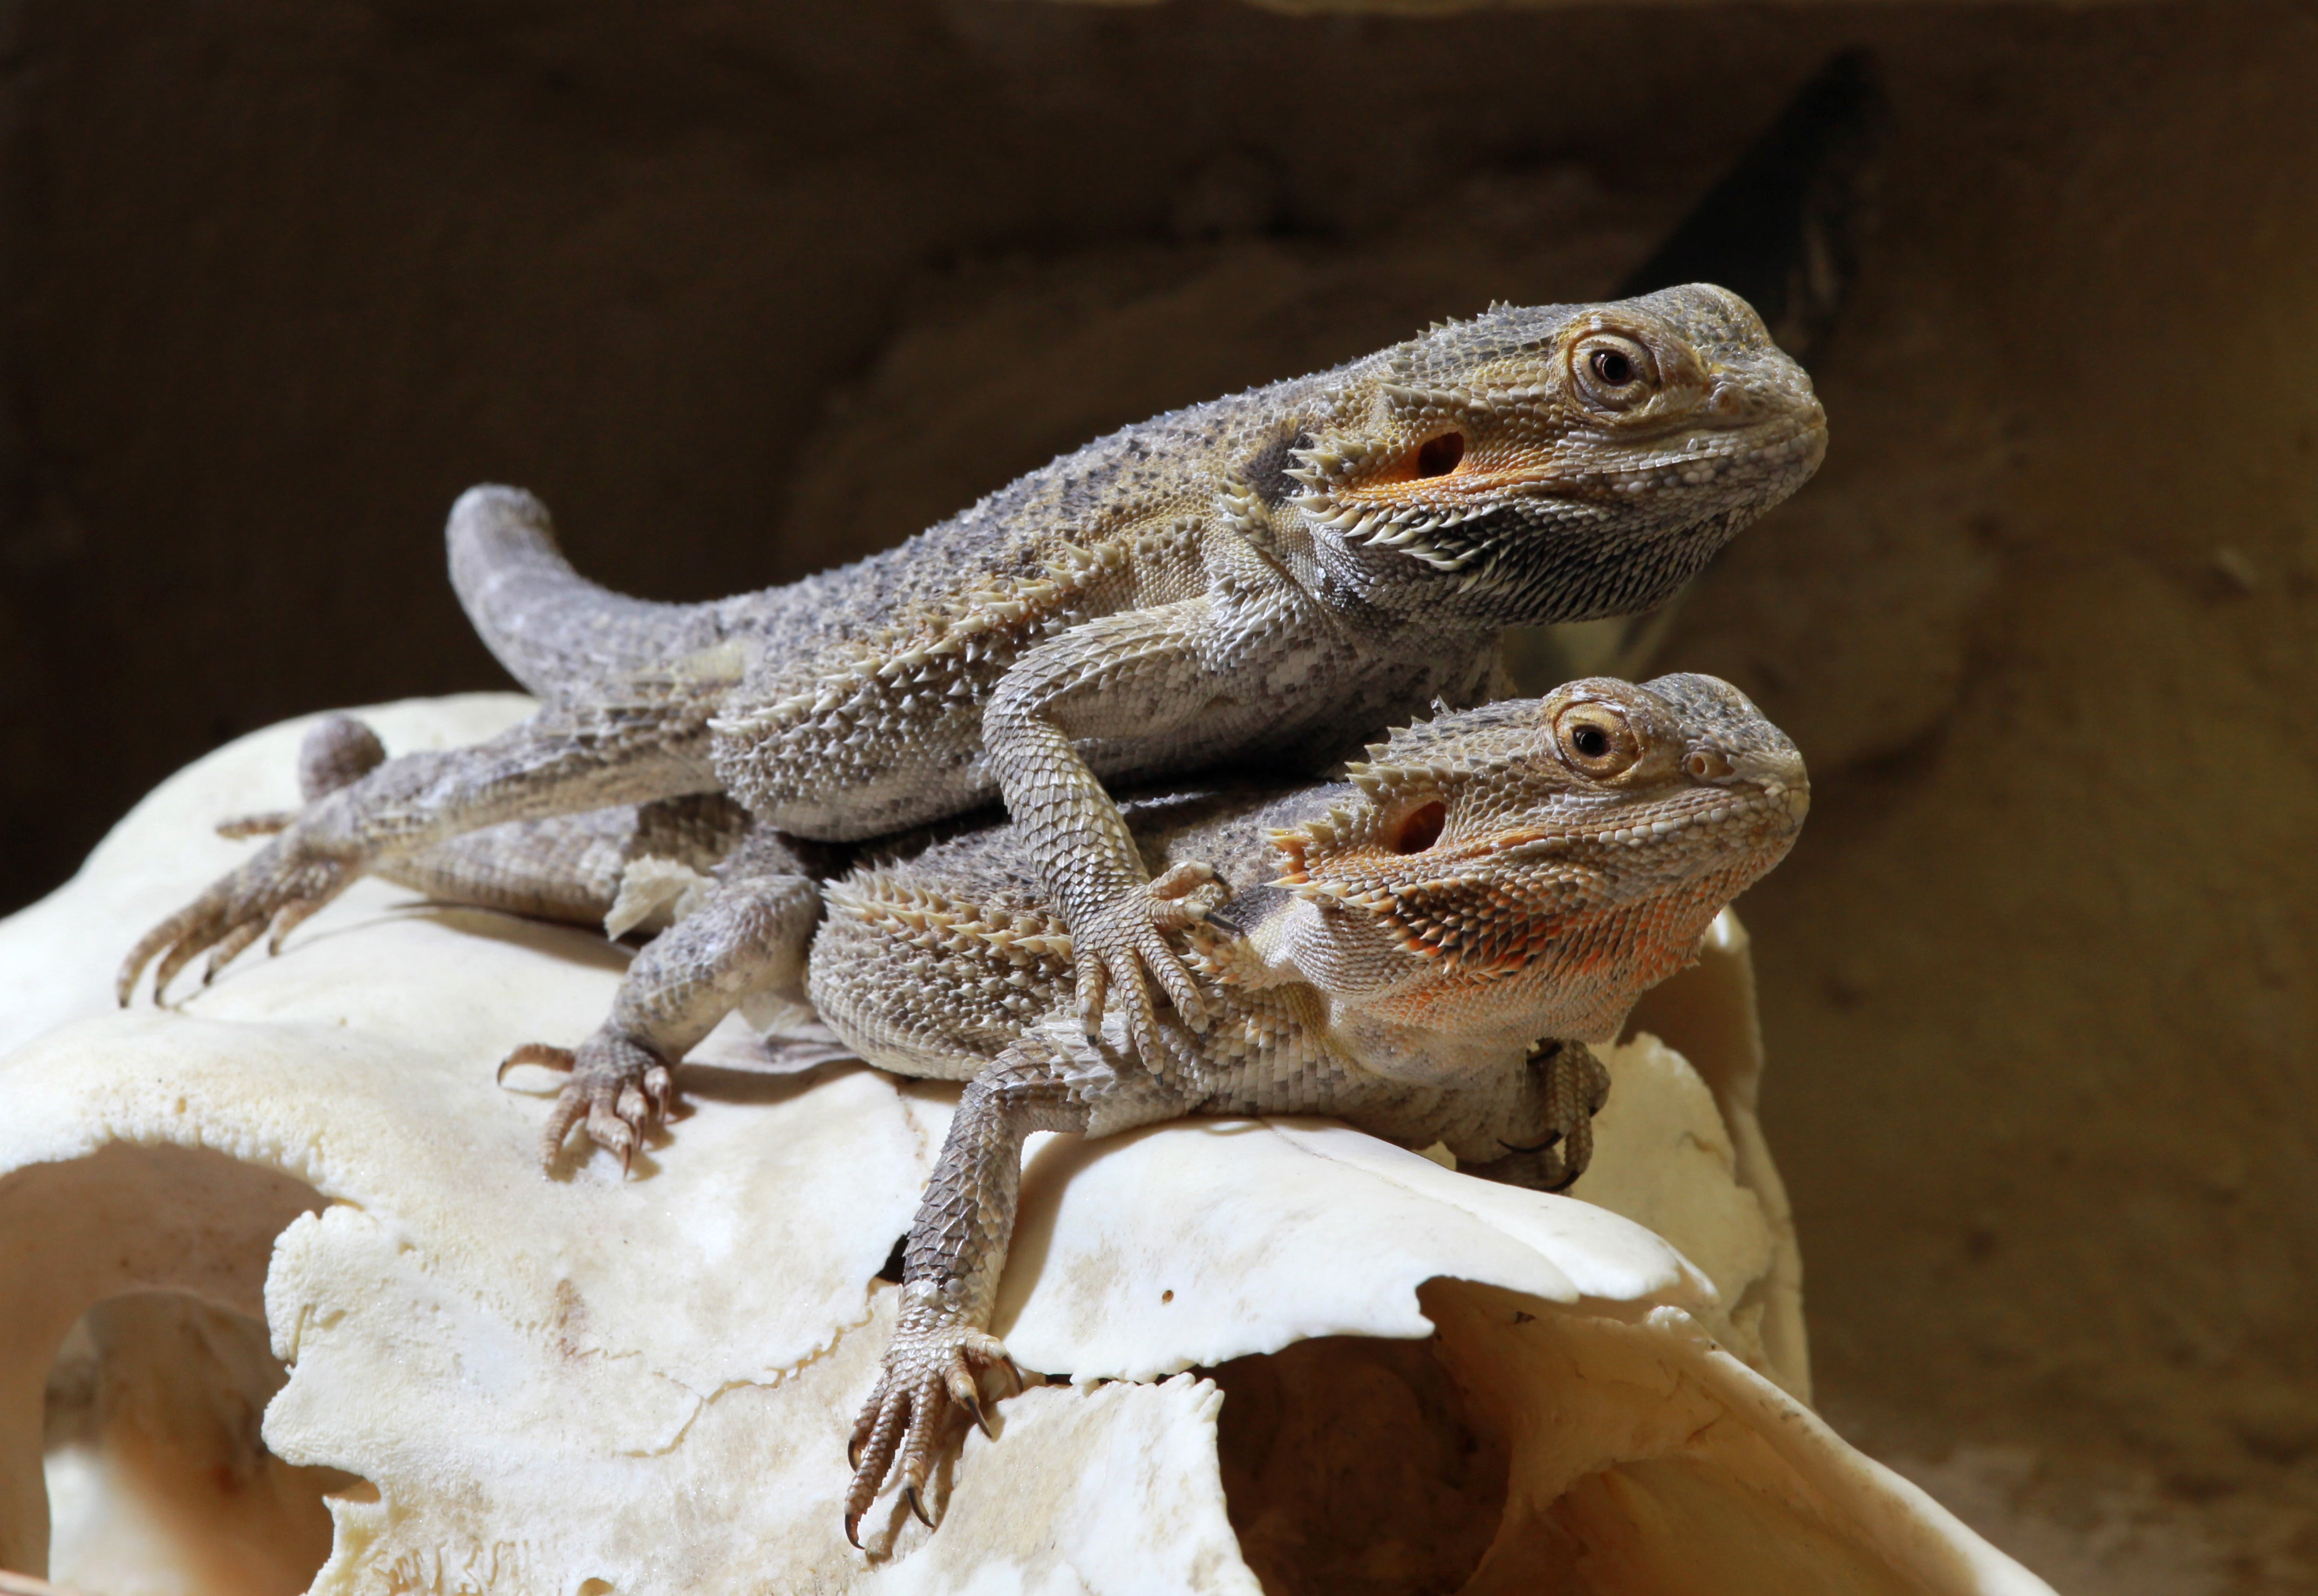 Can Bearded Dragons Cohabitate? - ABDRAGONS